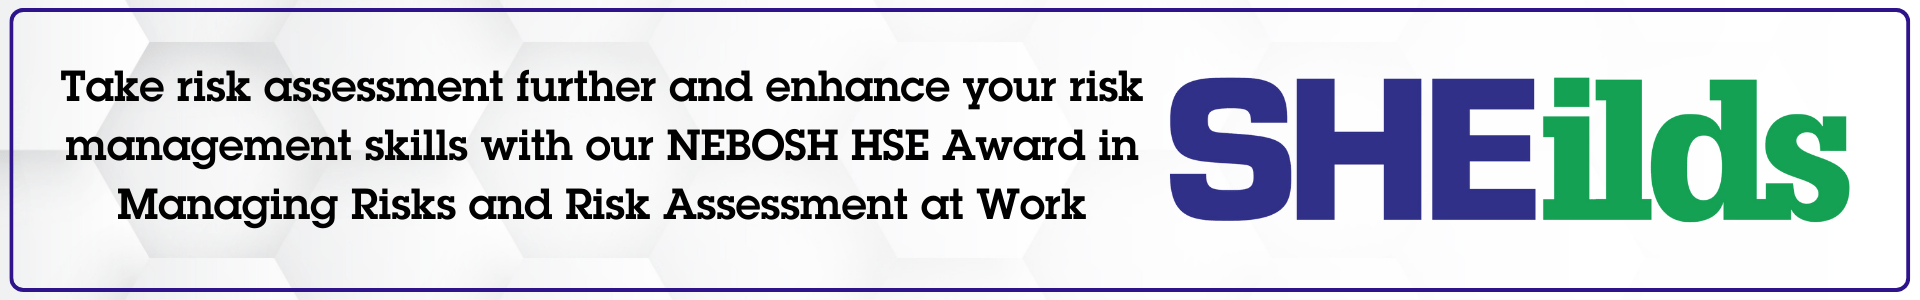 Take risk assessment further with our NEBOSH HSE Award